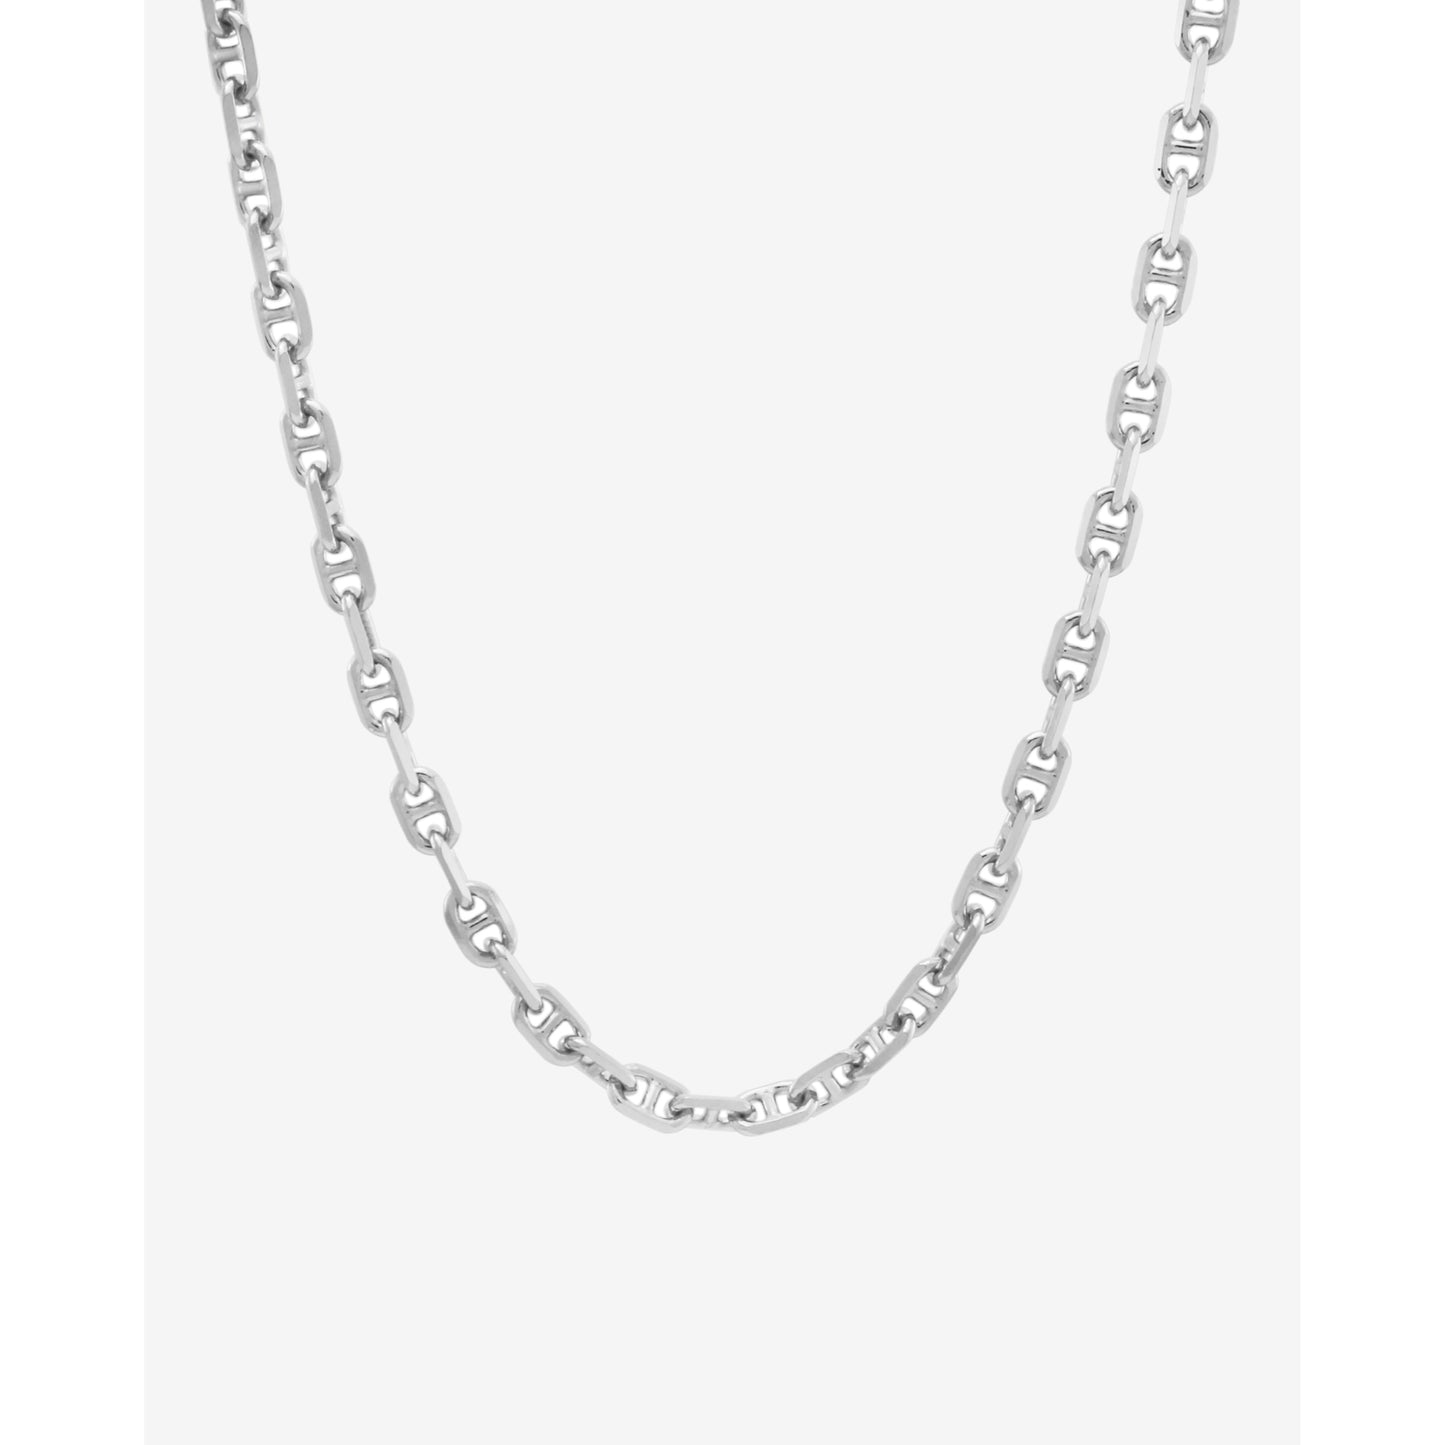 40cm Chunky Anchor Chain Necklace in Silver